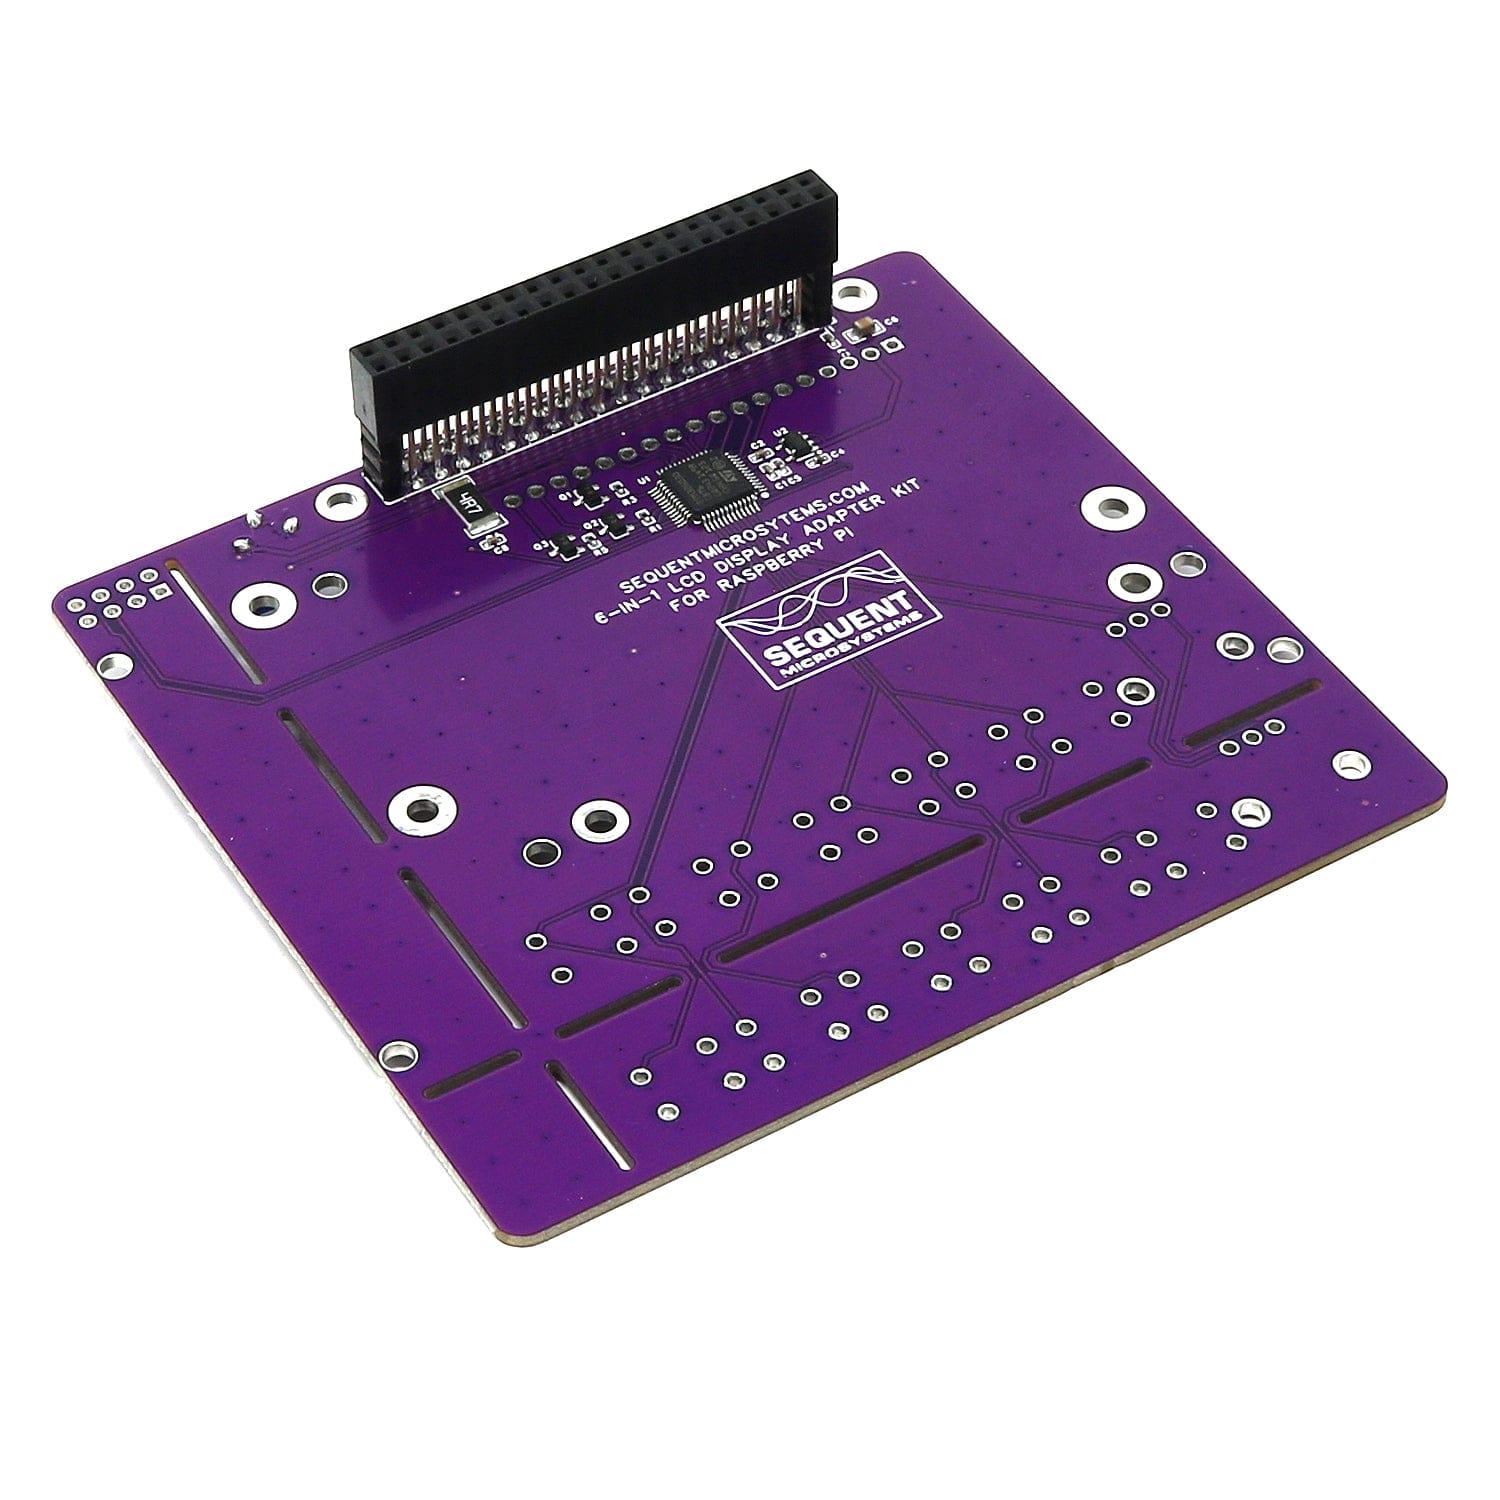 Six-in-one LCD Adapter Kit for Raspberry Pi - The Pi Hut